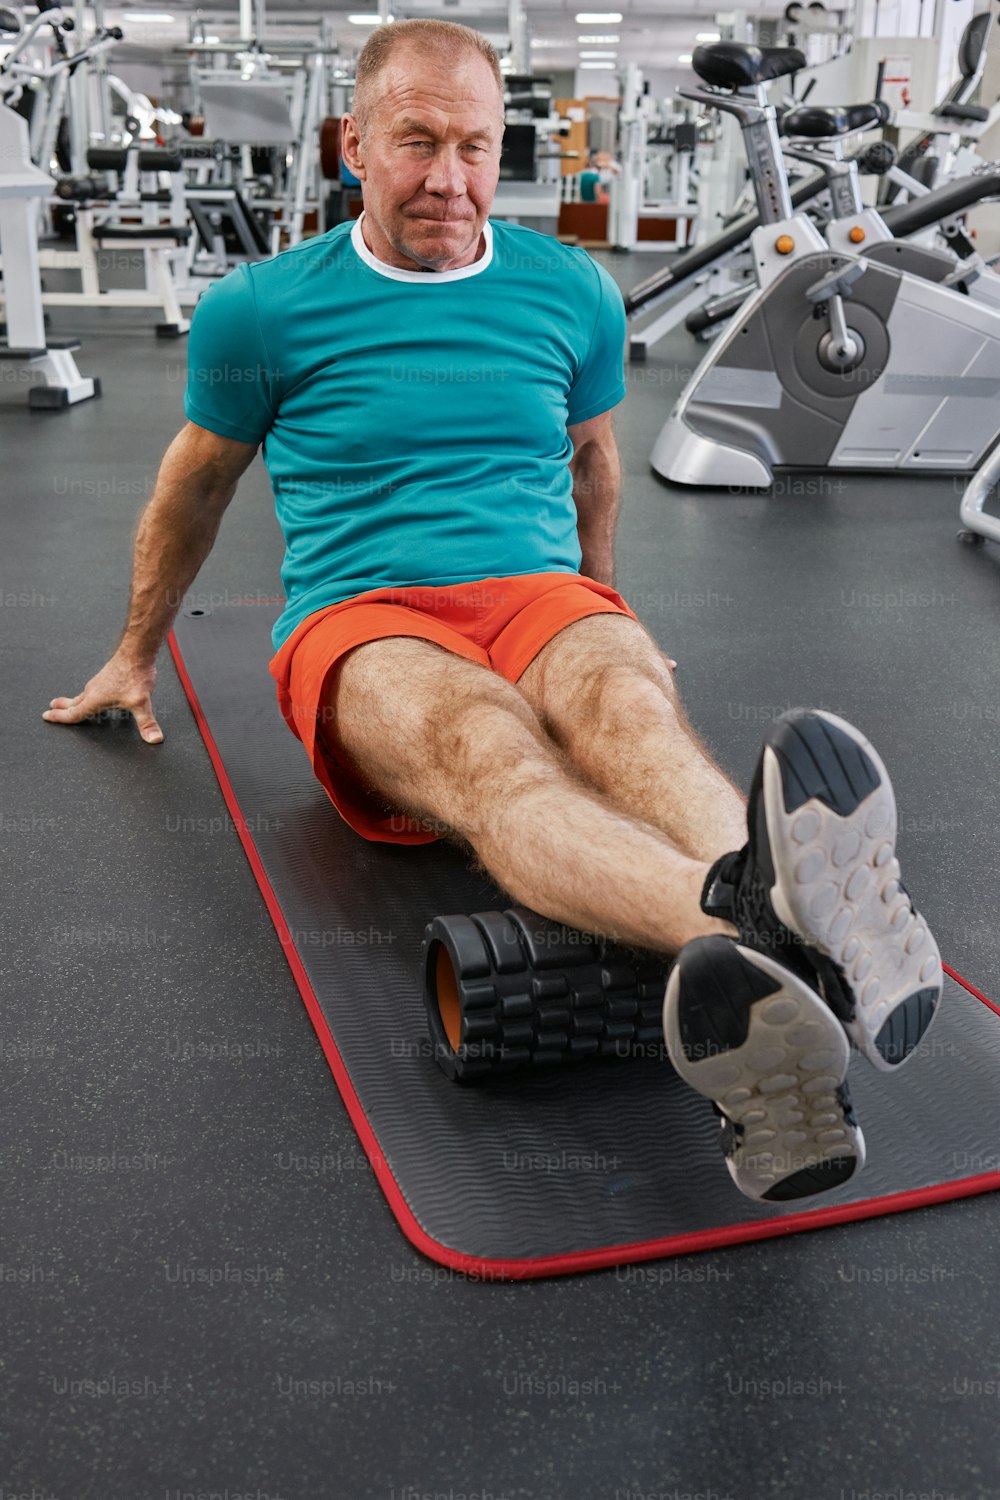 a man sitting on a mat in a gym